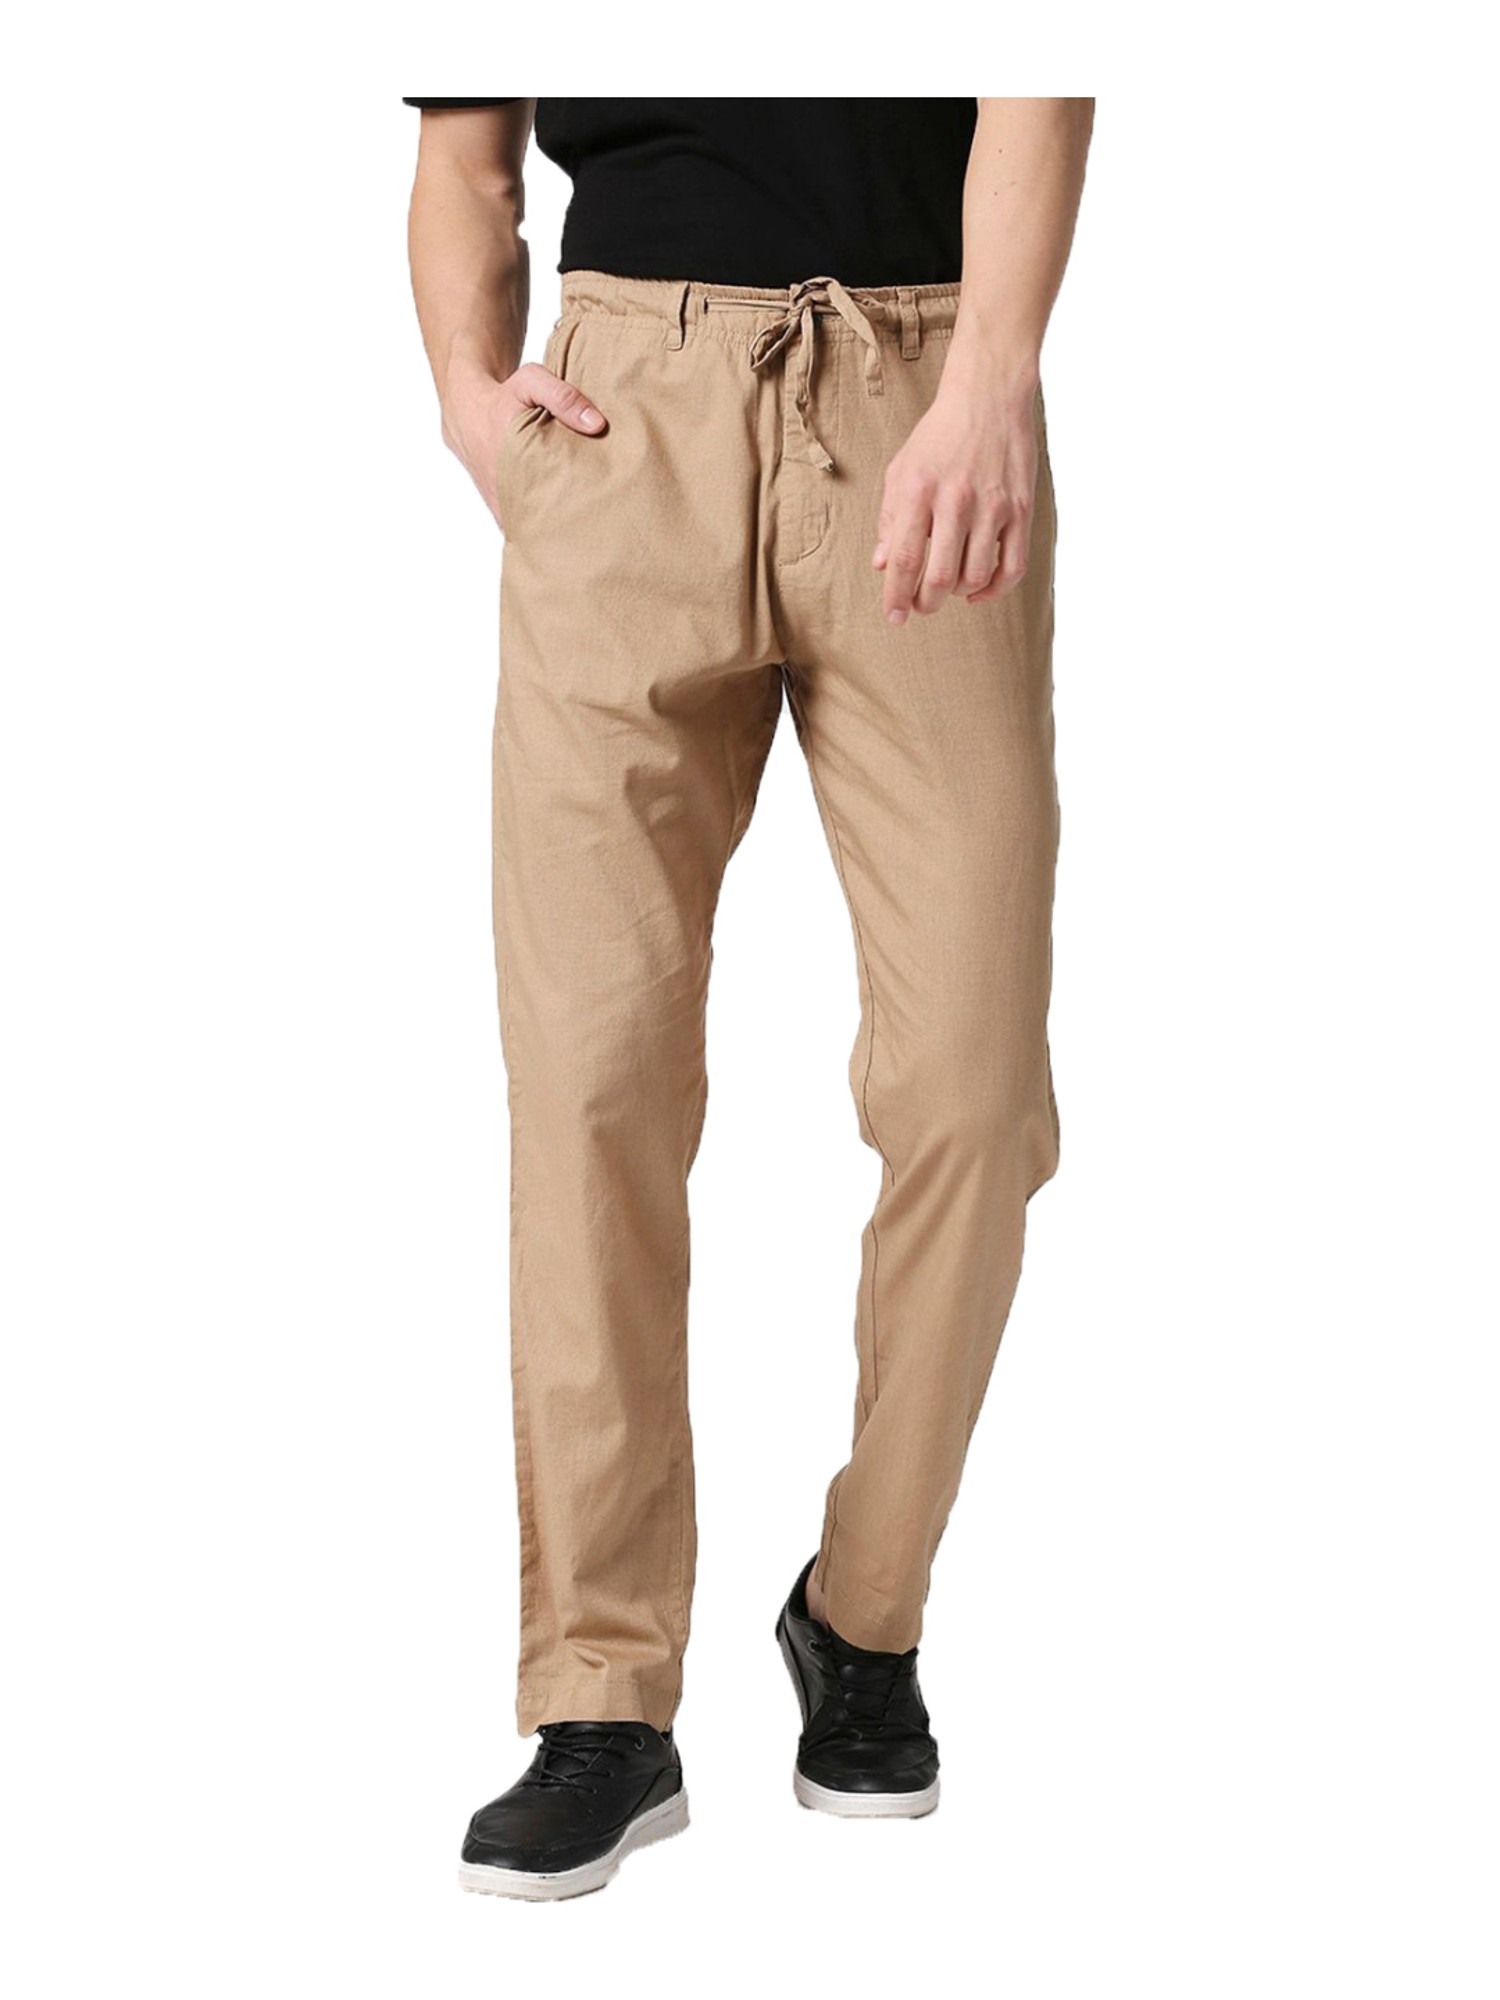 vermers Clearance Fashion Mens Pants Sport India  Ubuy